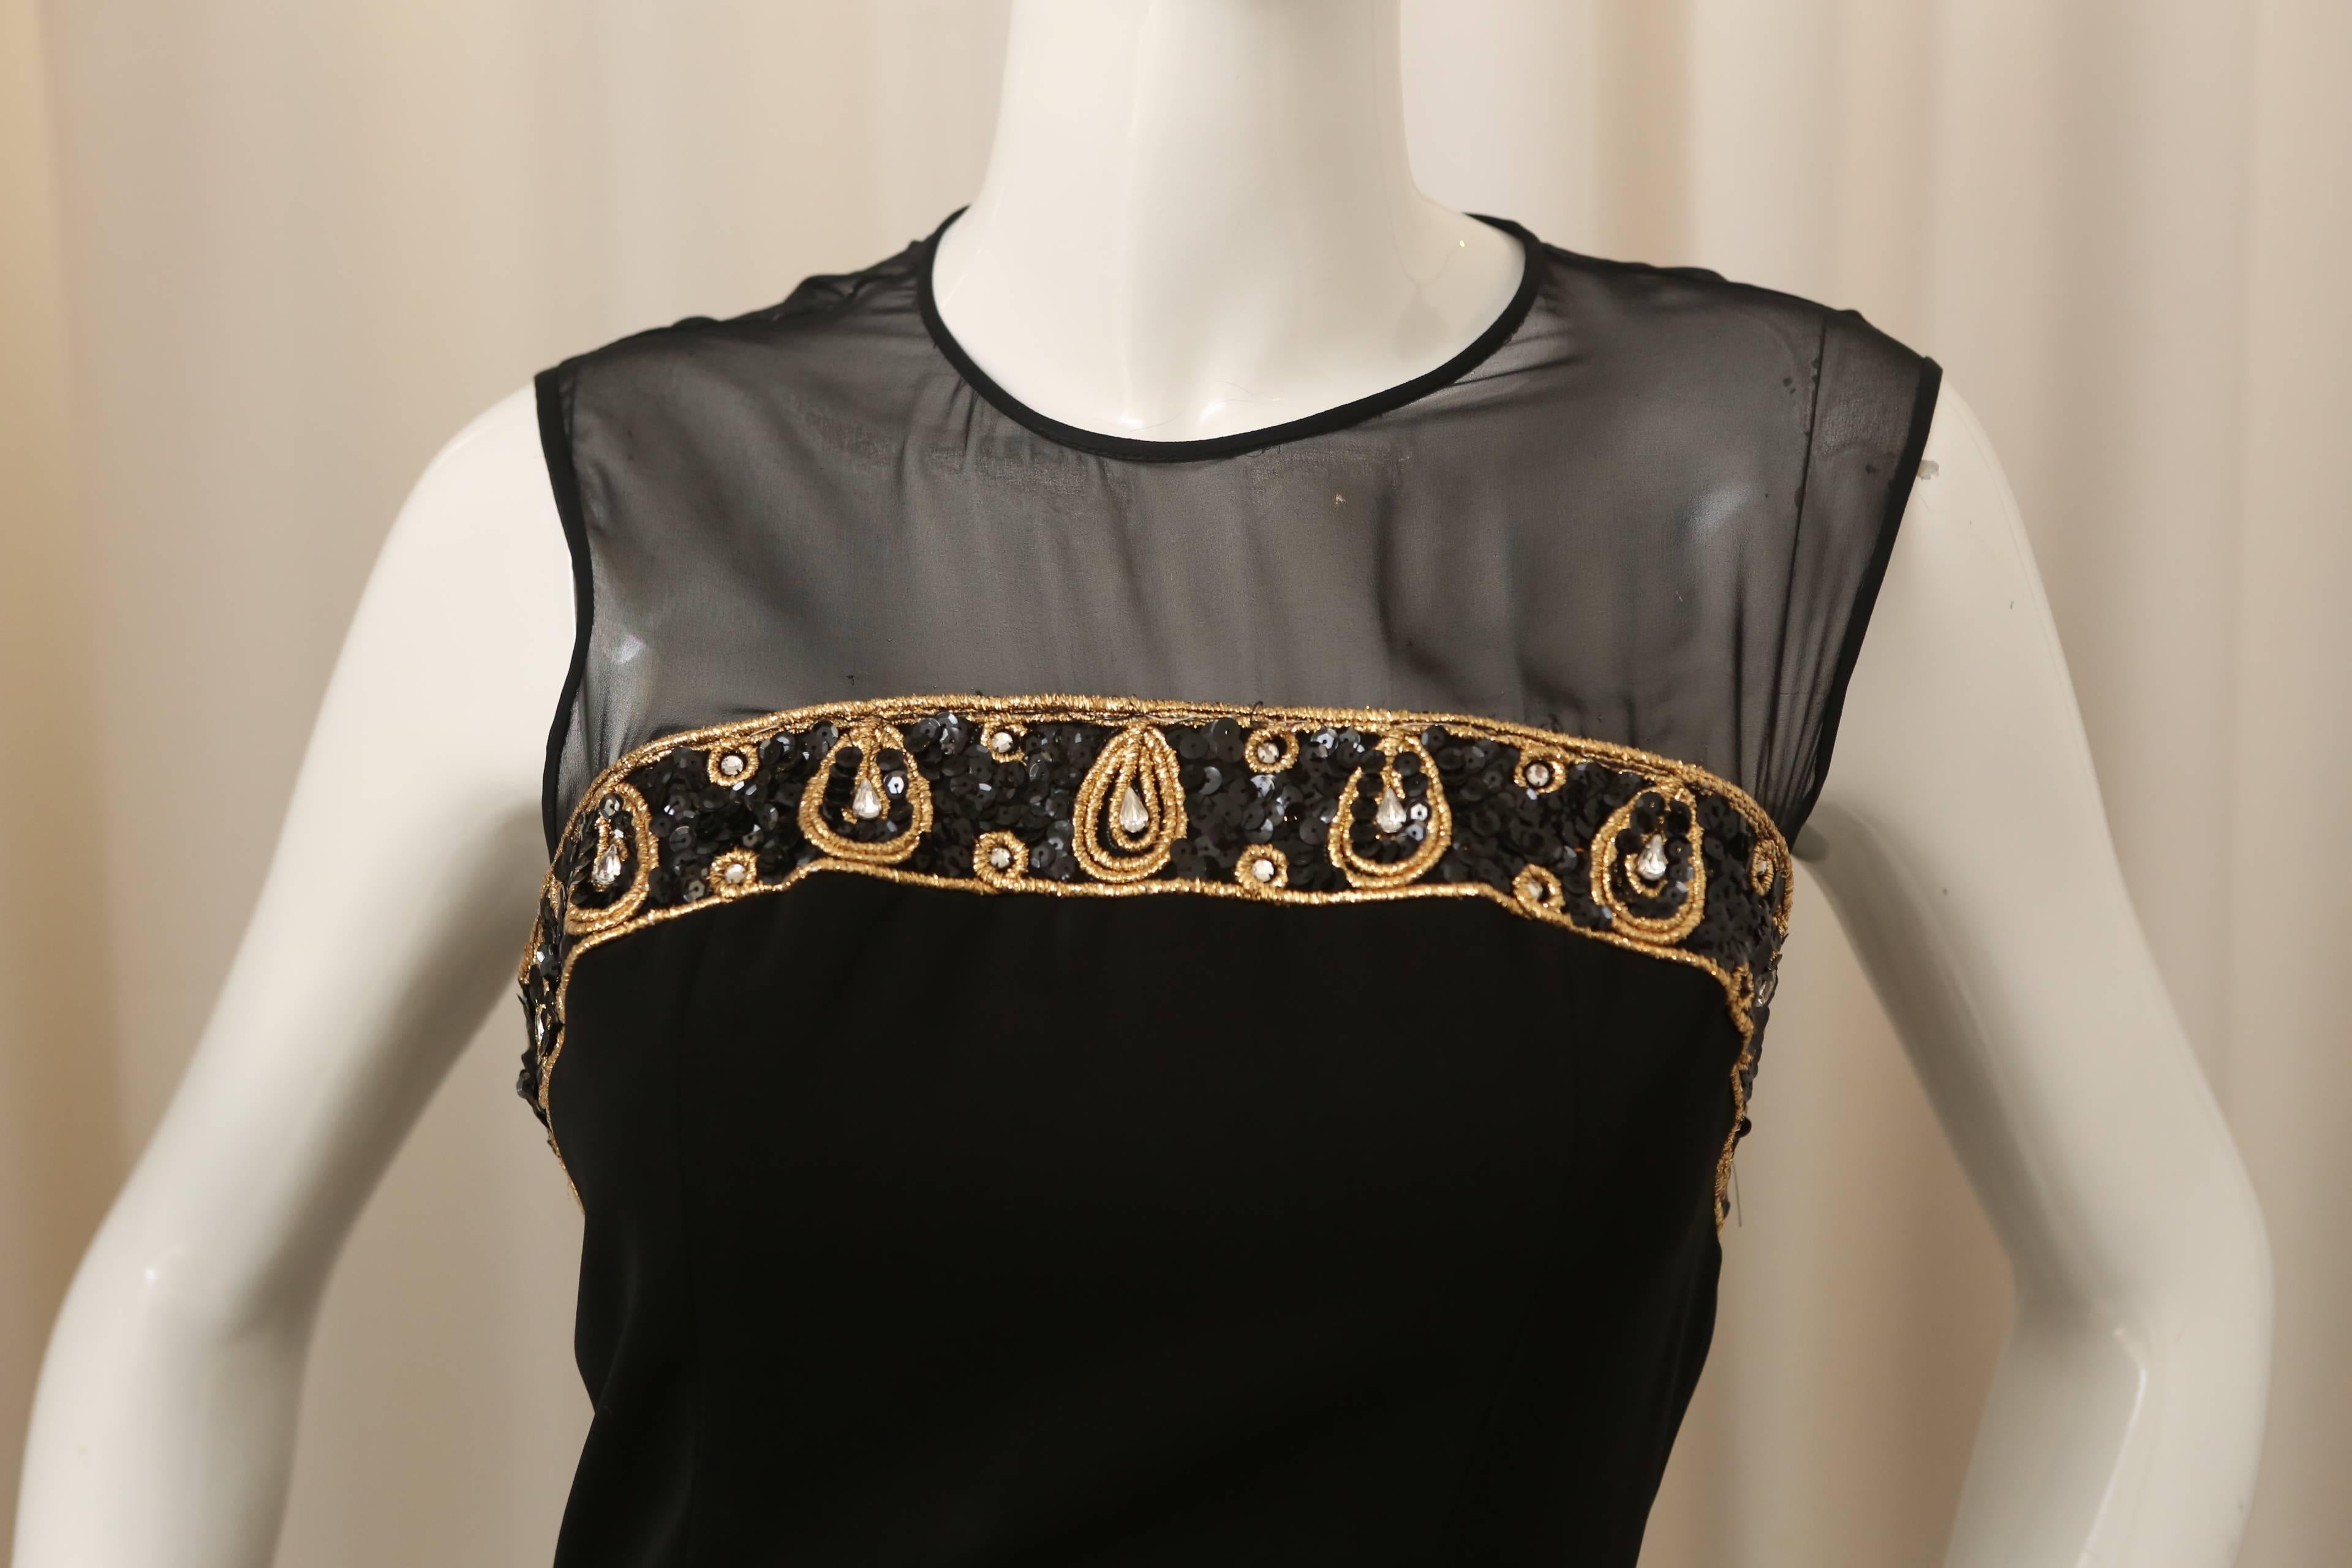 CD de Christian Dior black/gold sleeveless dress with mesh detail and embellishment.  Sequin bow detail in the back. Button closure.